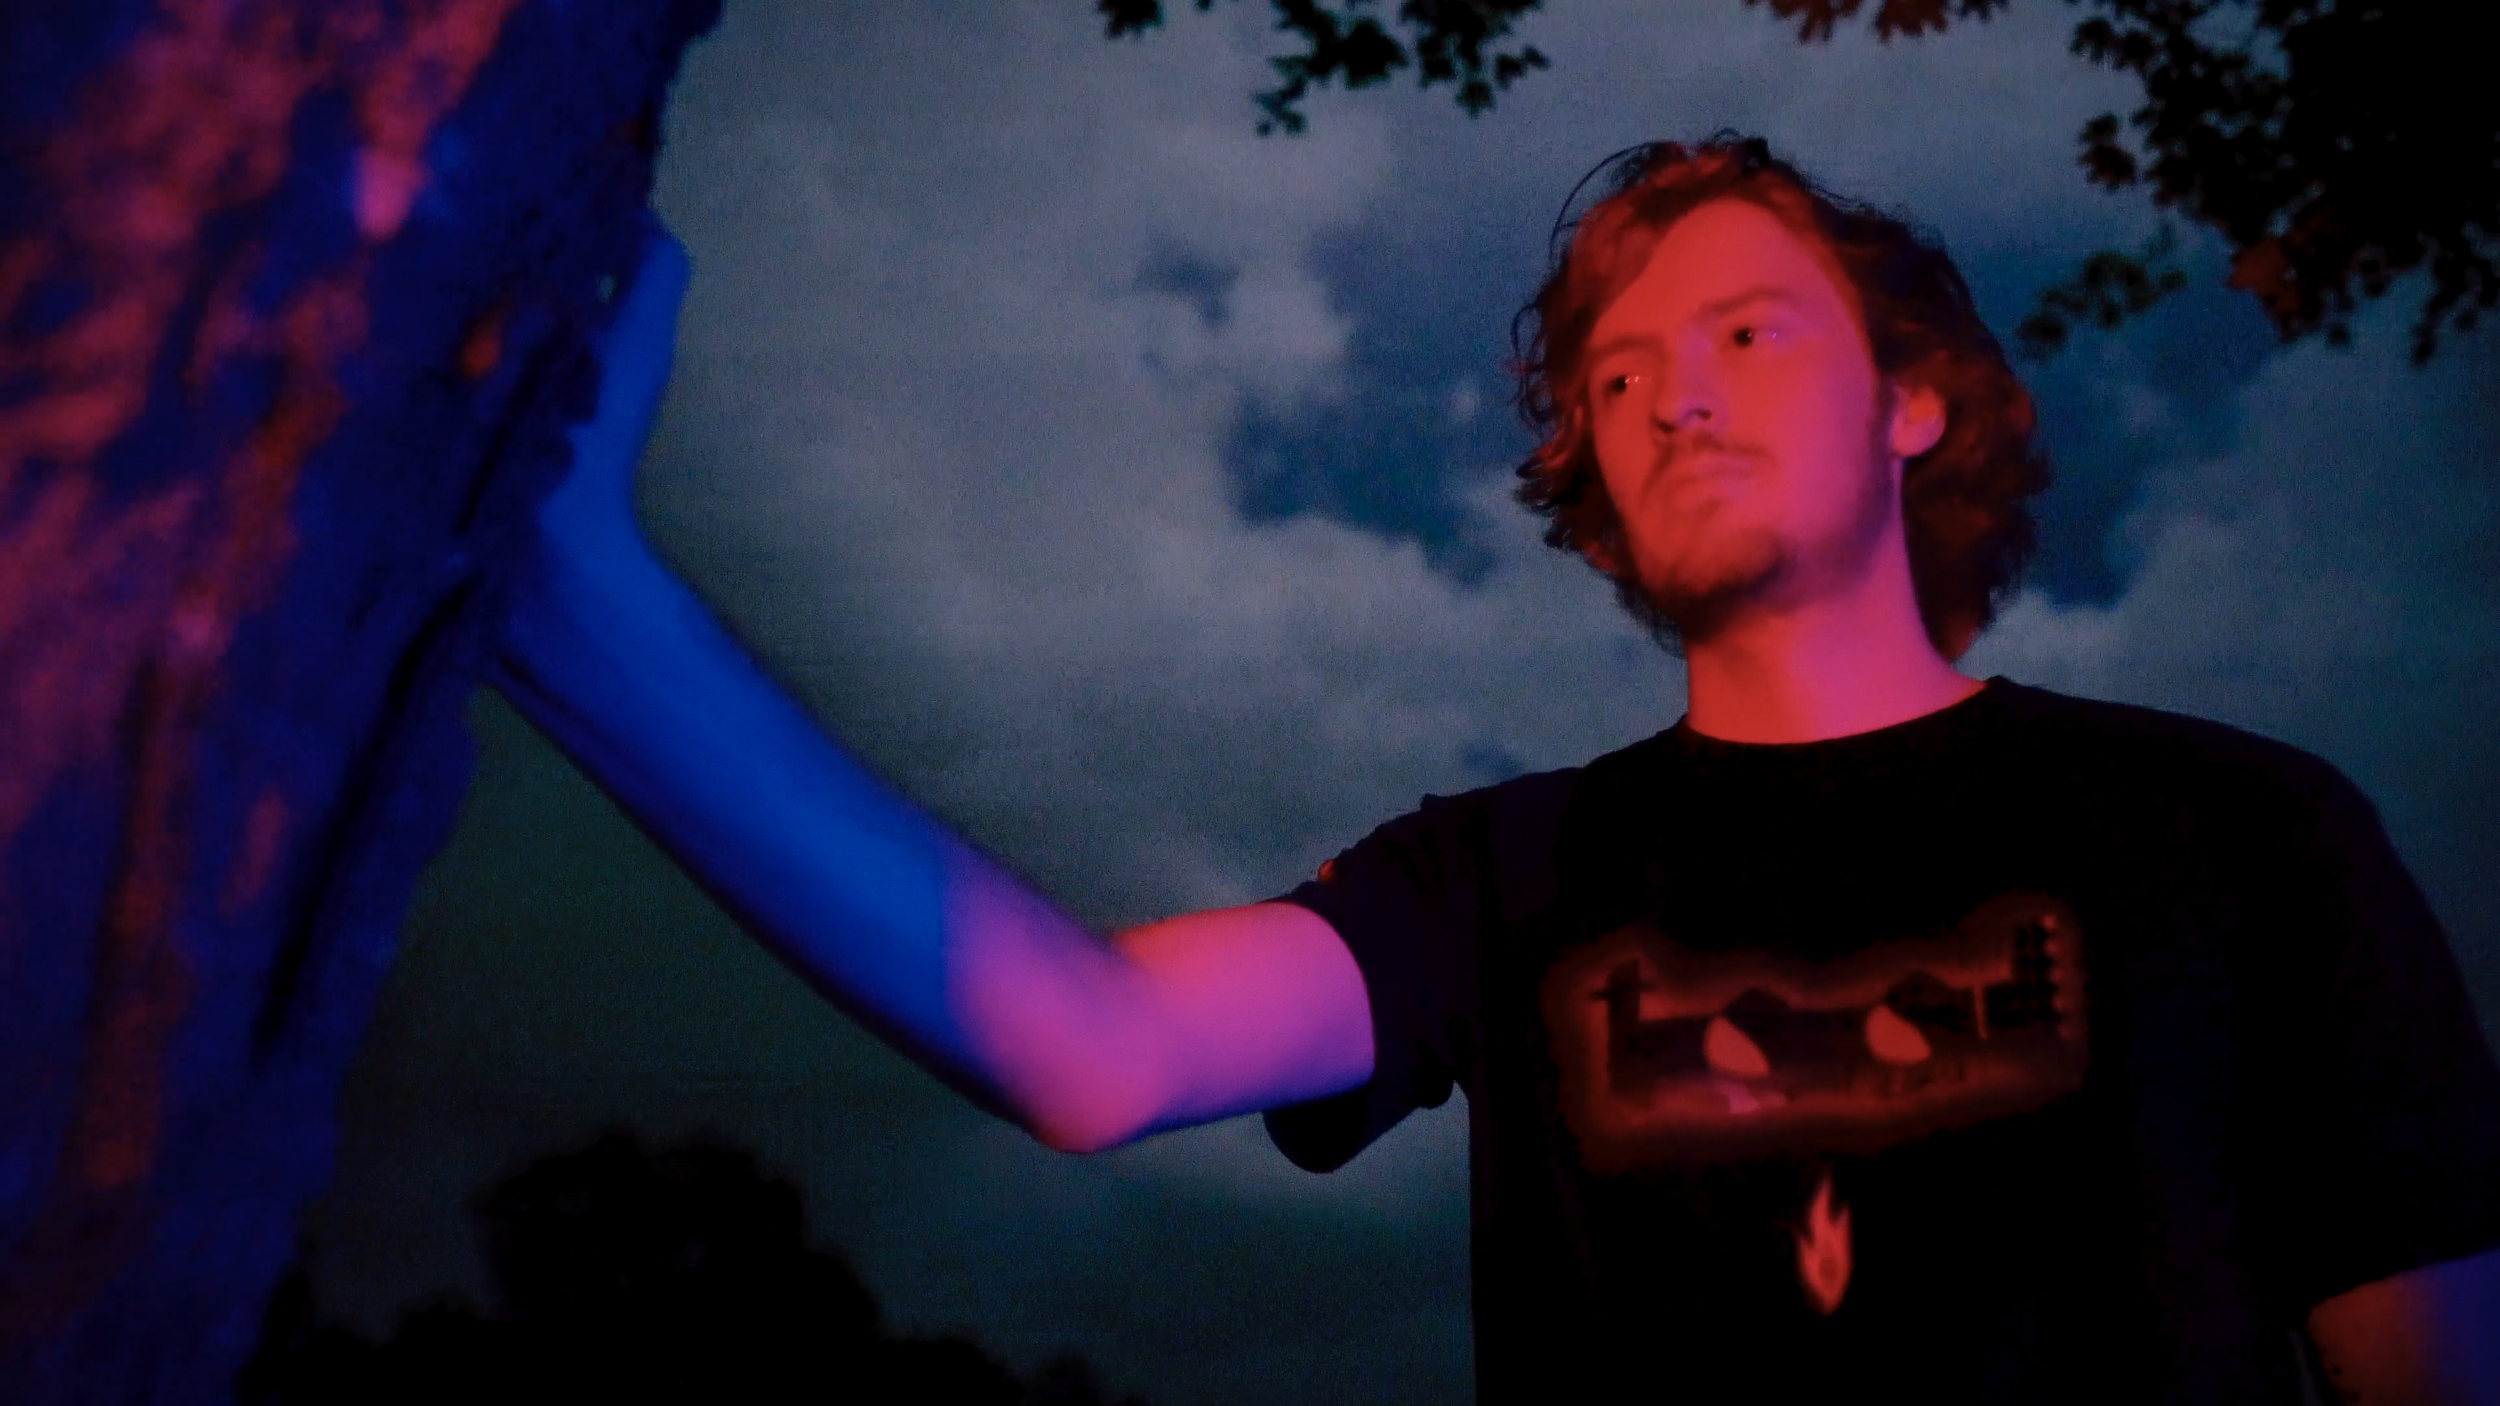 A screenshot from the music video for "Arvil - Cosmos"